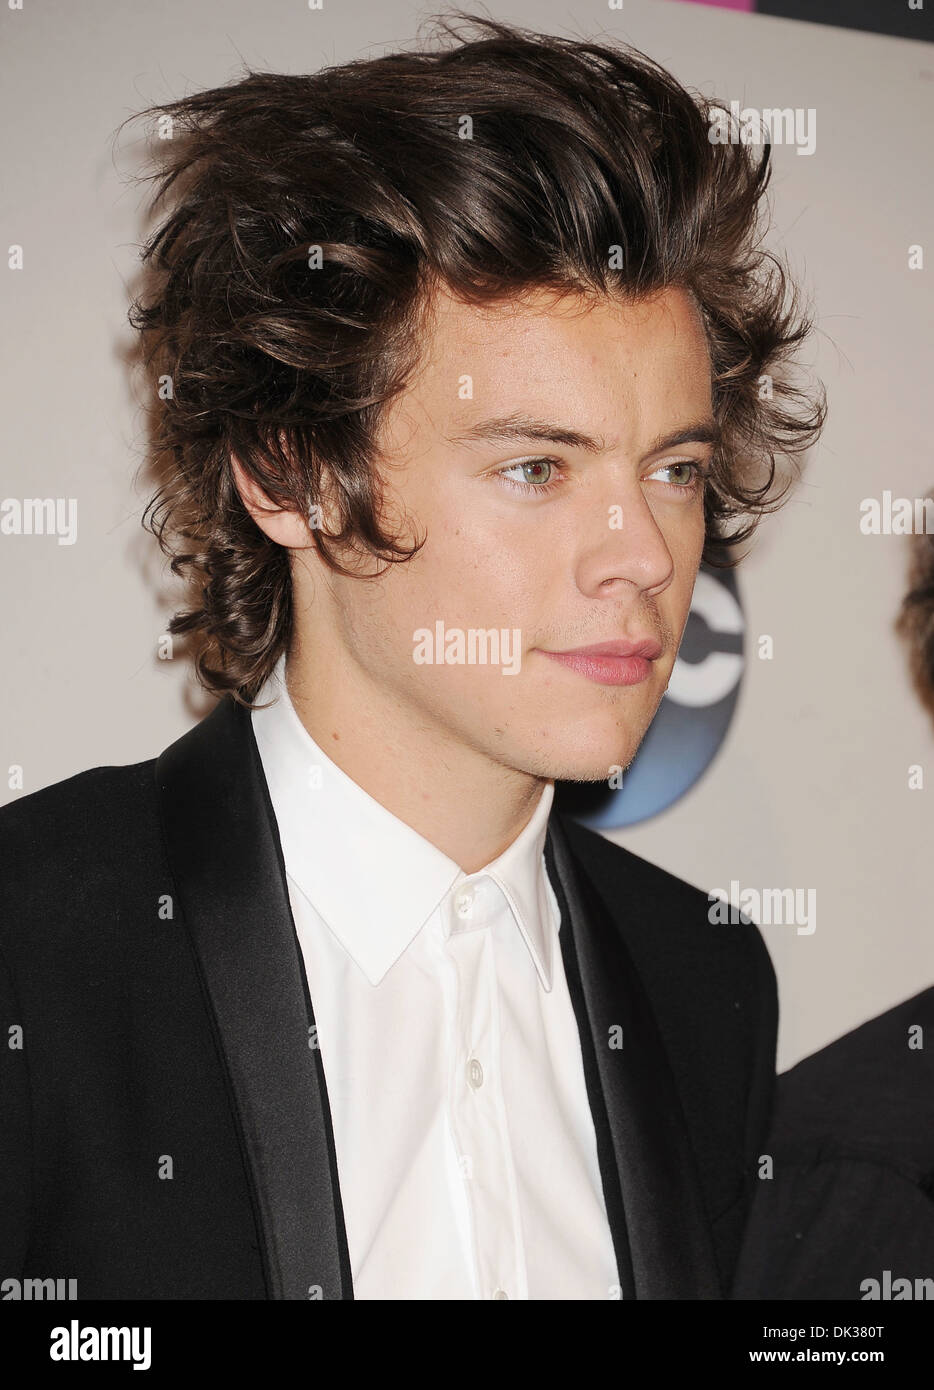 Who es harry styles from 2013 Neue australische Dating-Show